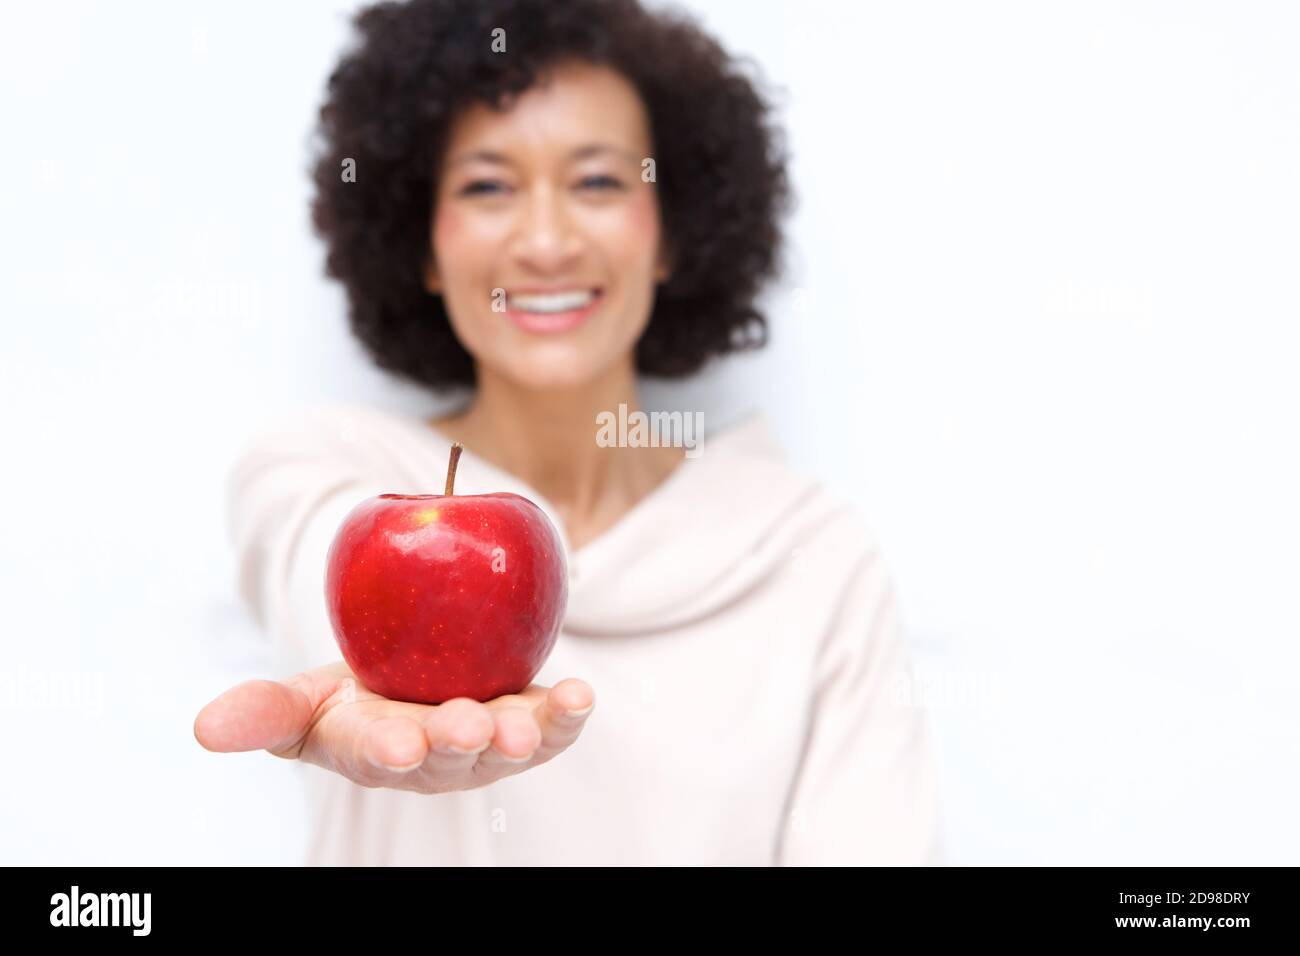 Close up portrait of older woman holding red apple in hand Stock Photo